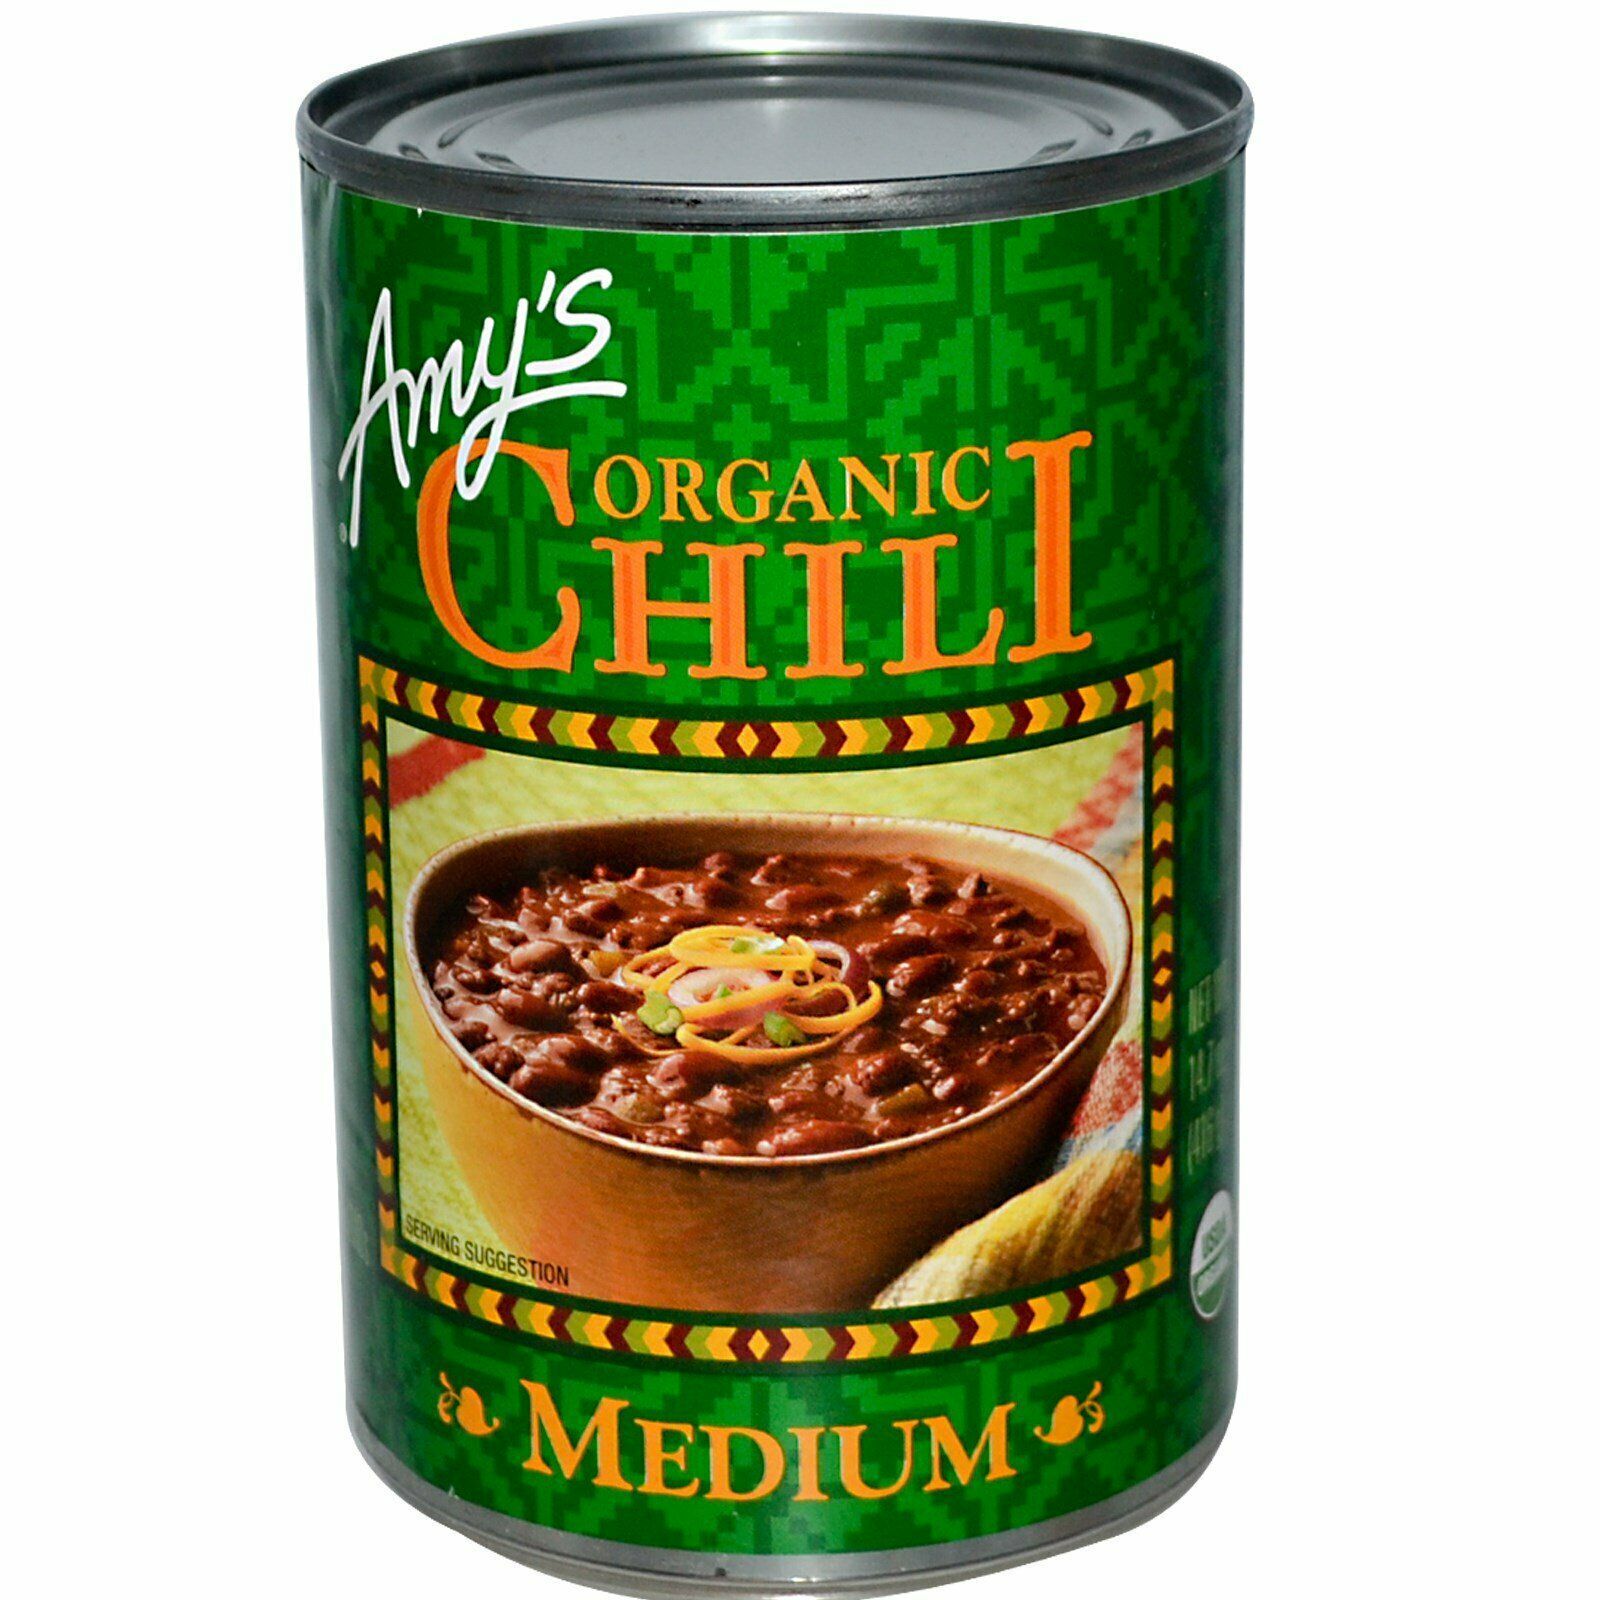 Primary image for Amy's Organic Medium Chili Bean 14.7 oz ( Pack of 6 )